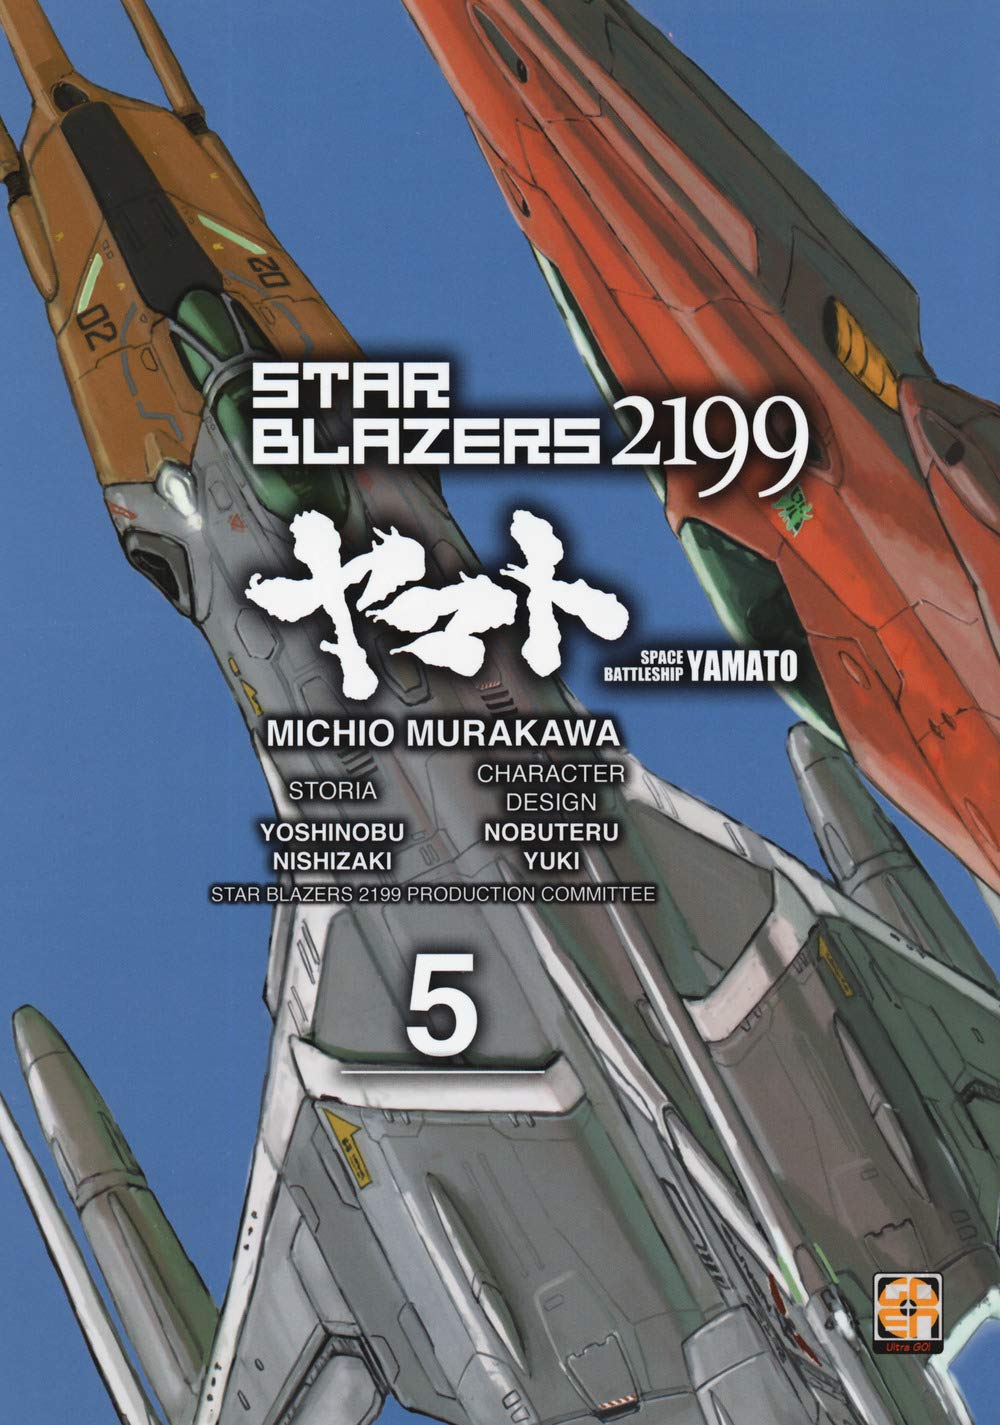 CULT COLLECTION #35 STAR BLAZERS 2199 5